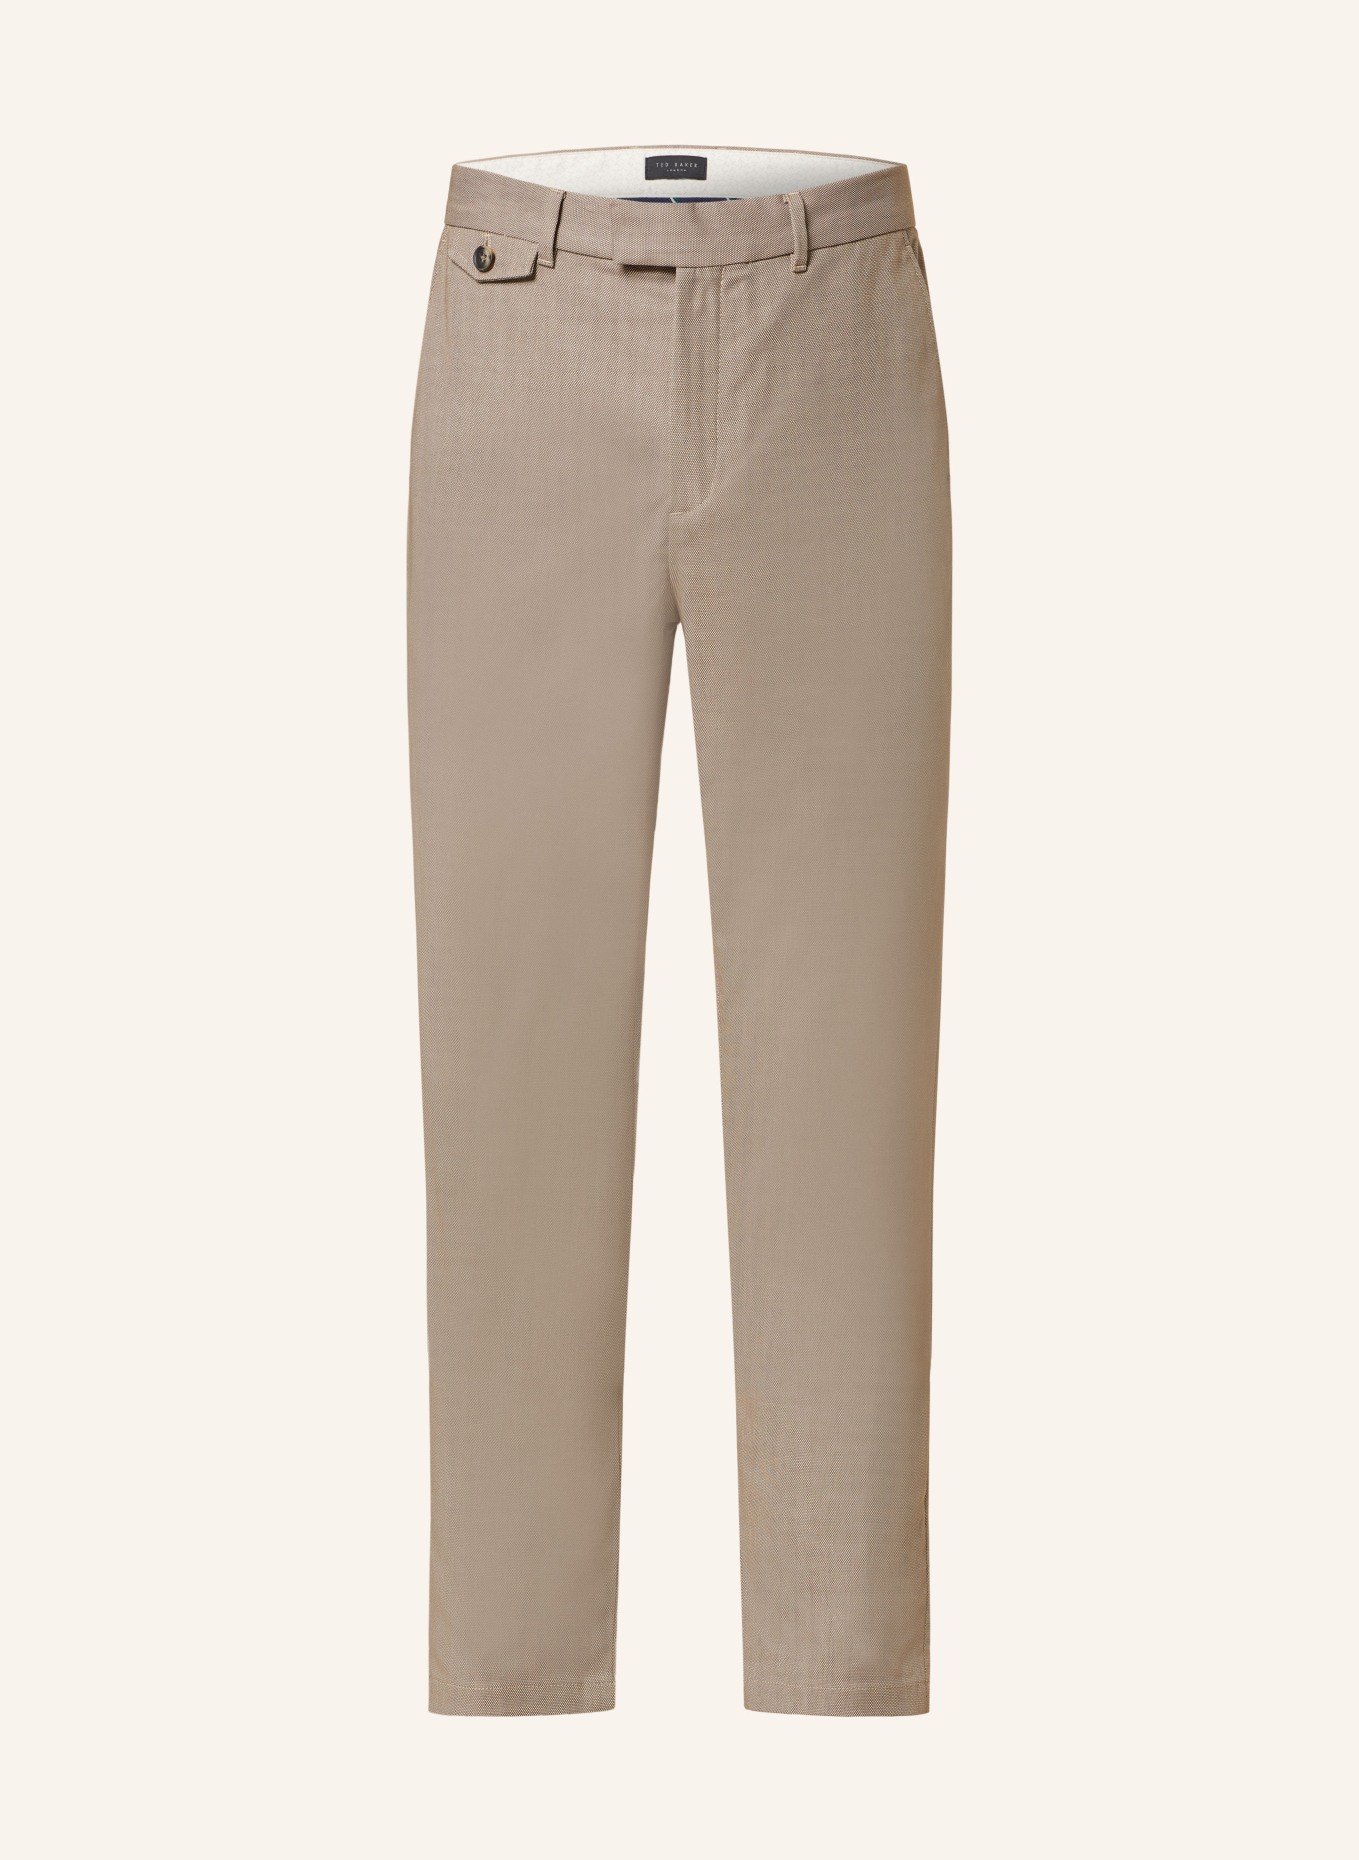 TED BAKER Chino TURNEY Slim Fit, Farbe: TAUPE (Bild 1)